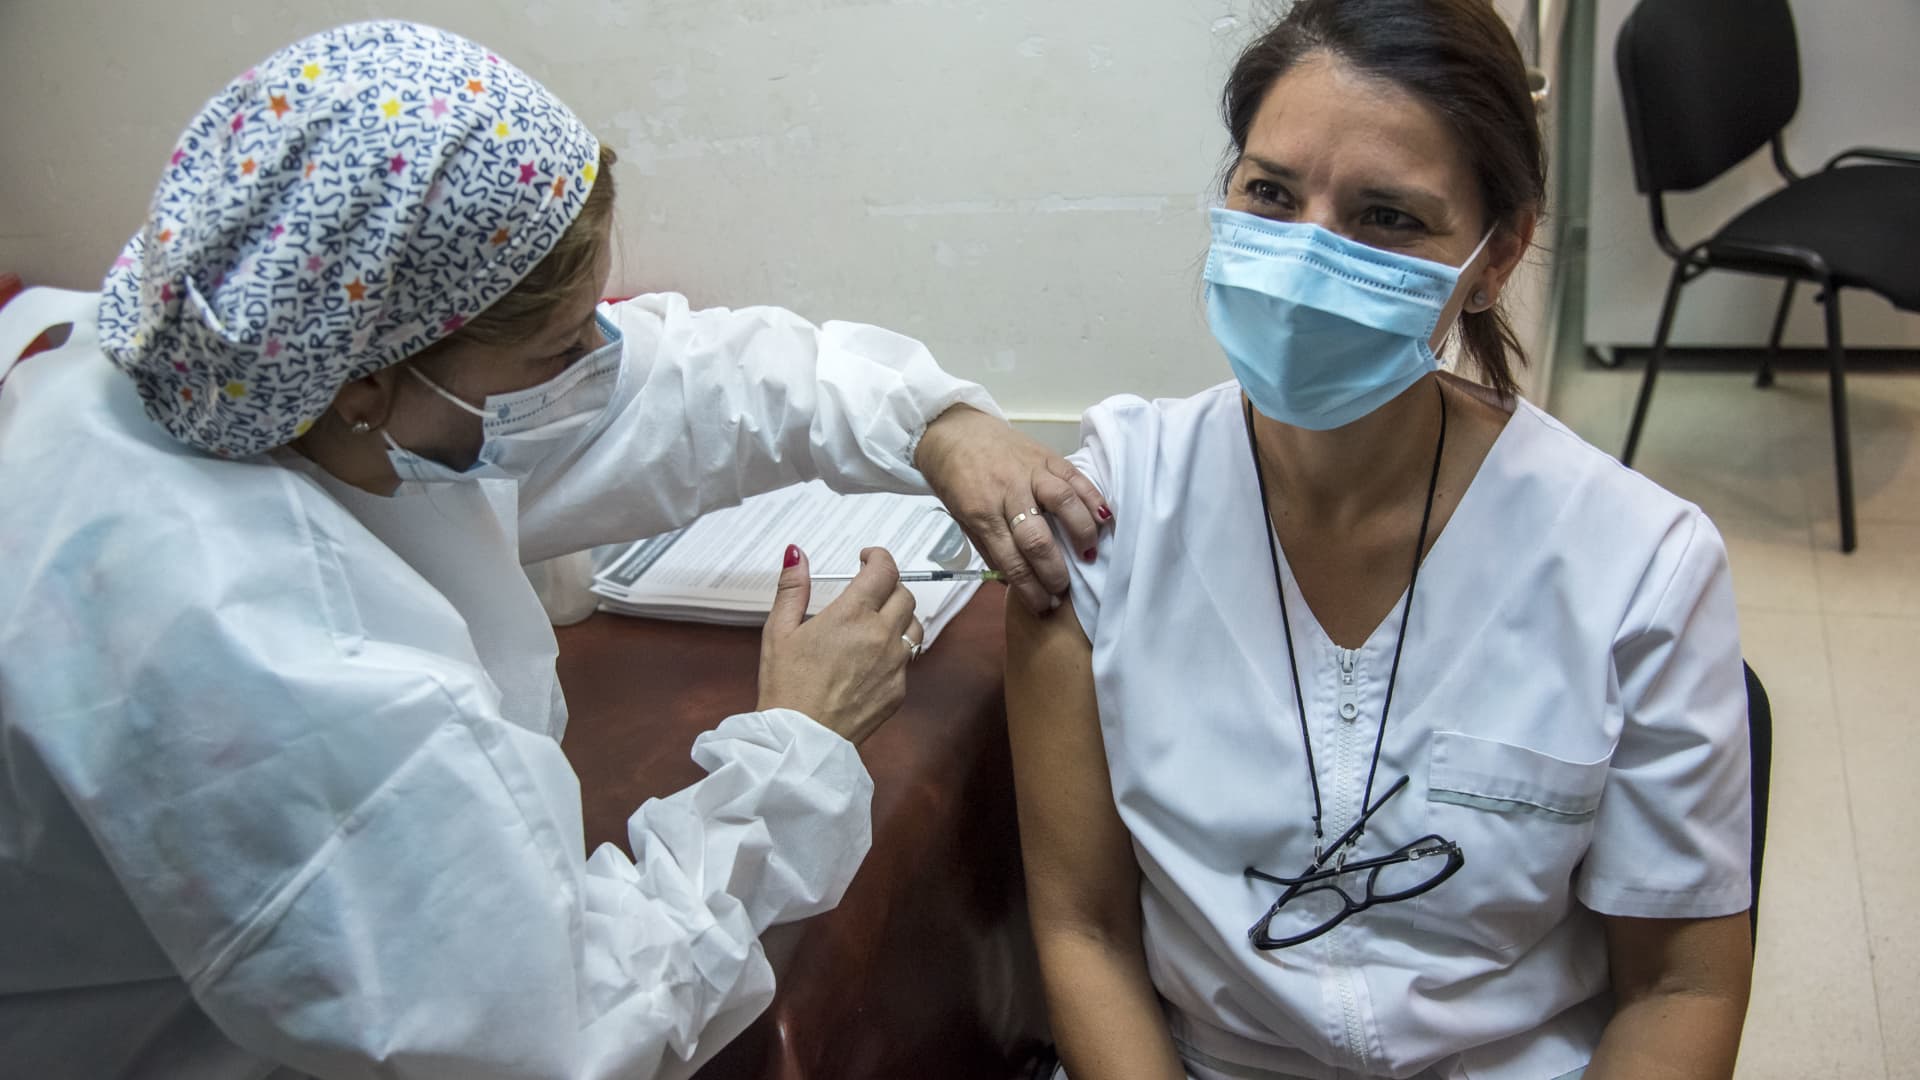 A health worker gets the Sputnik V vaccine at the Centenario Hospital in Rosario, Santa Fe Province, as the vaccination campaign against the novel coronavirus Covid-19 started in Argentina, on Dec. 29, 2020.